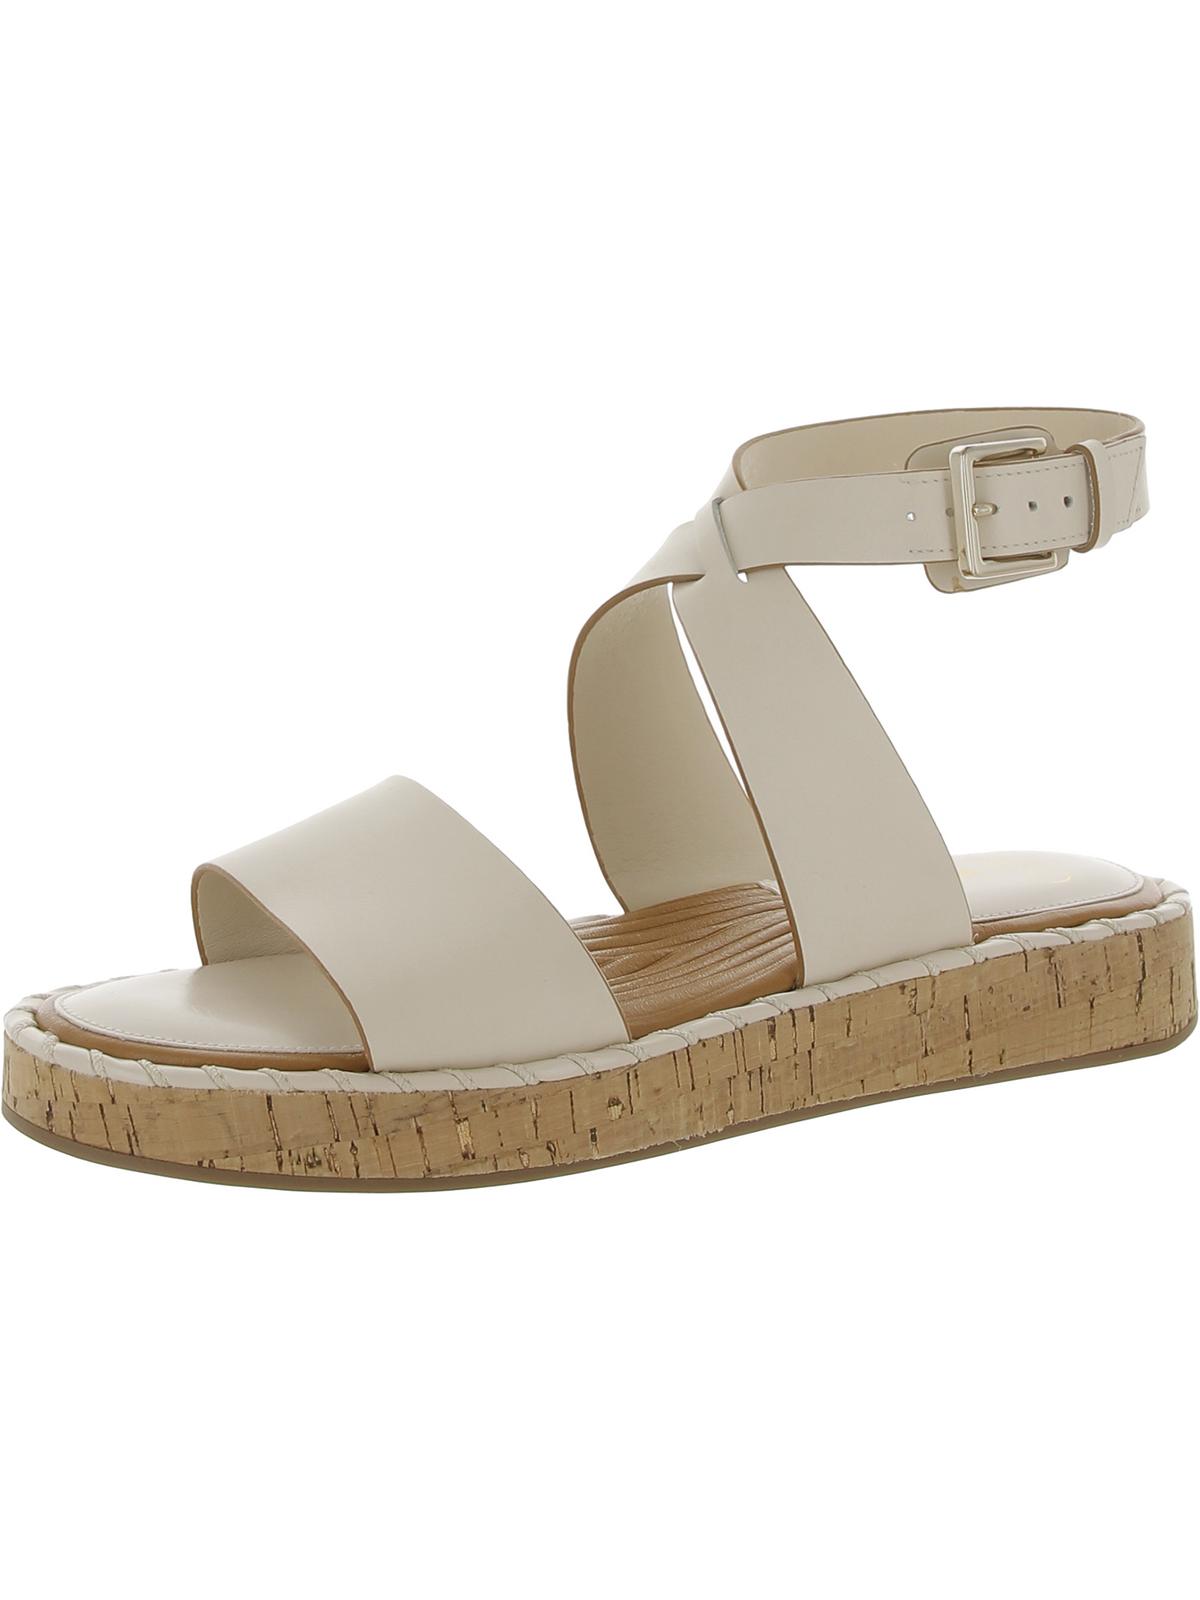 Shop Sarto Franco Sarto Darla Womens Leather Ankle Strap Wedge Sandals In Beige